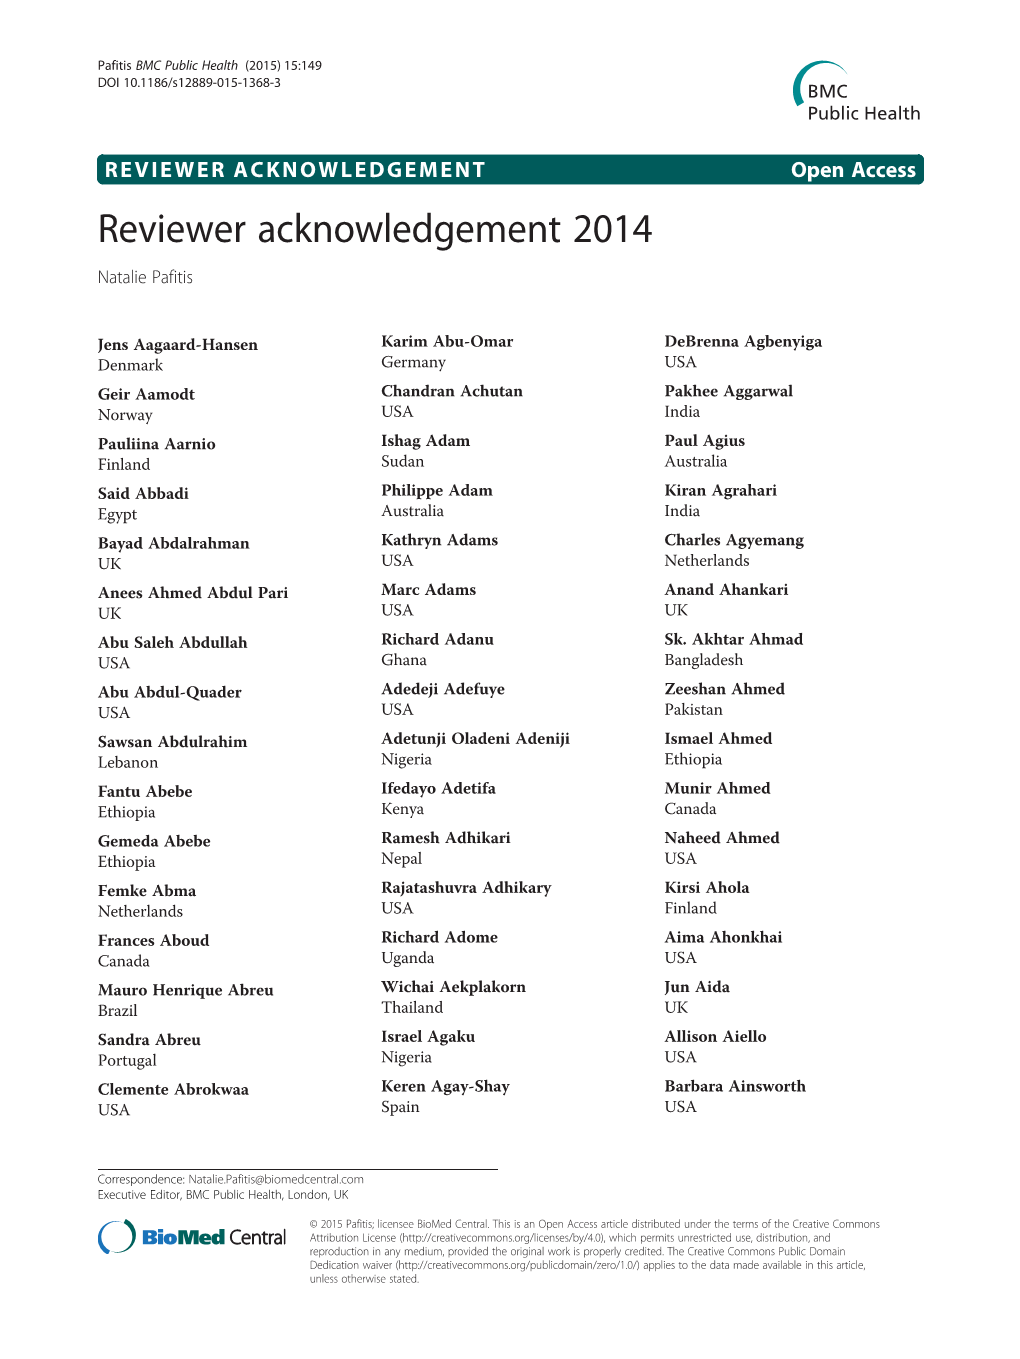 Reviewer Acknowledgement 2014 Natalie Pafitis